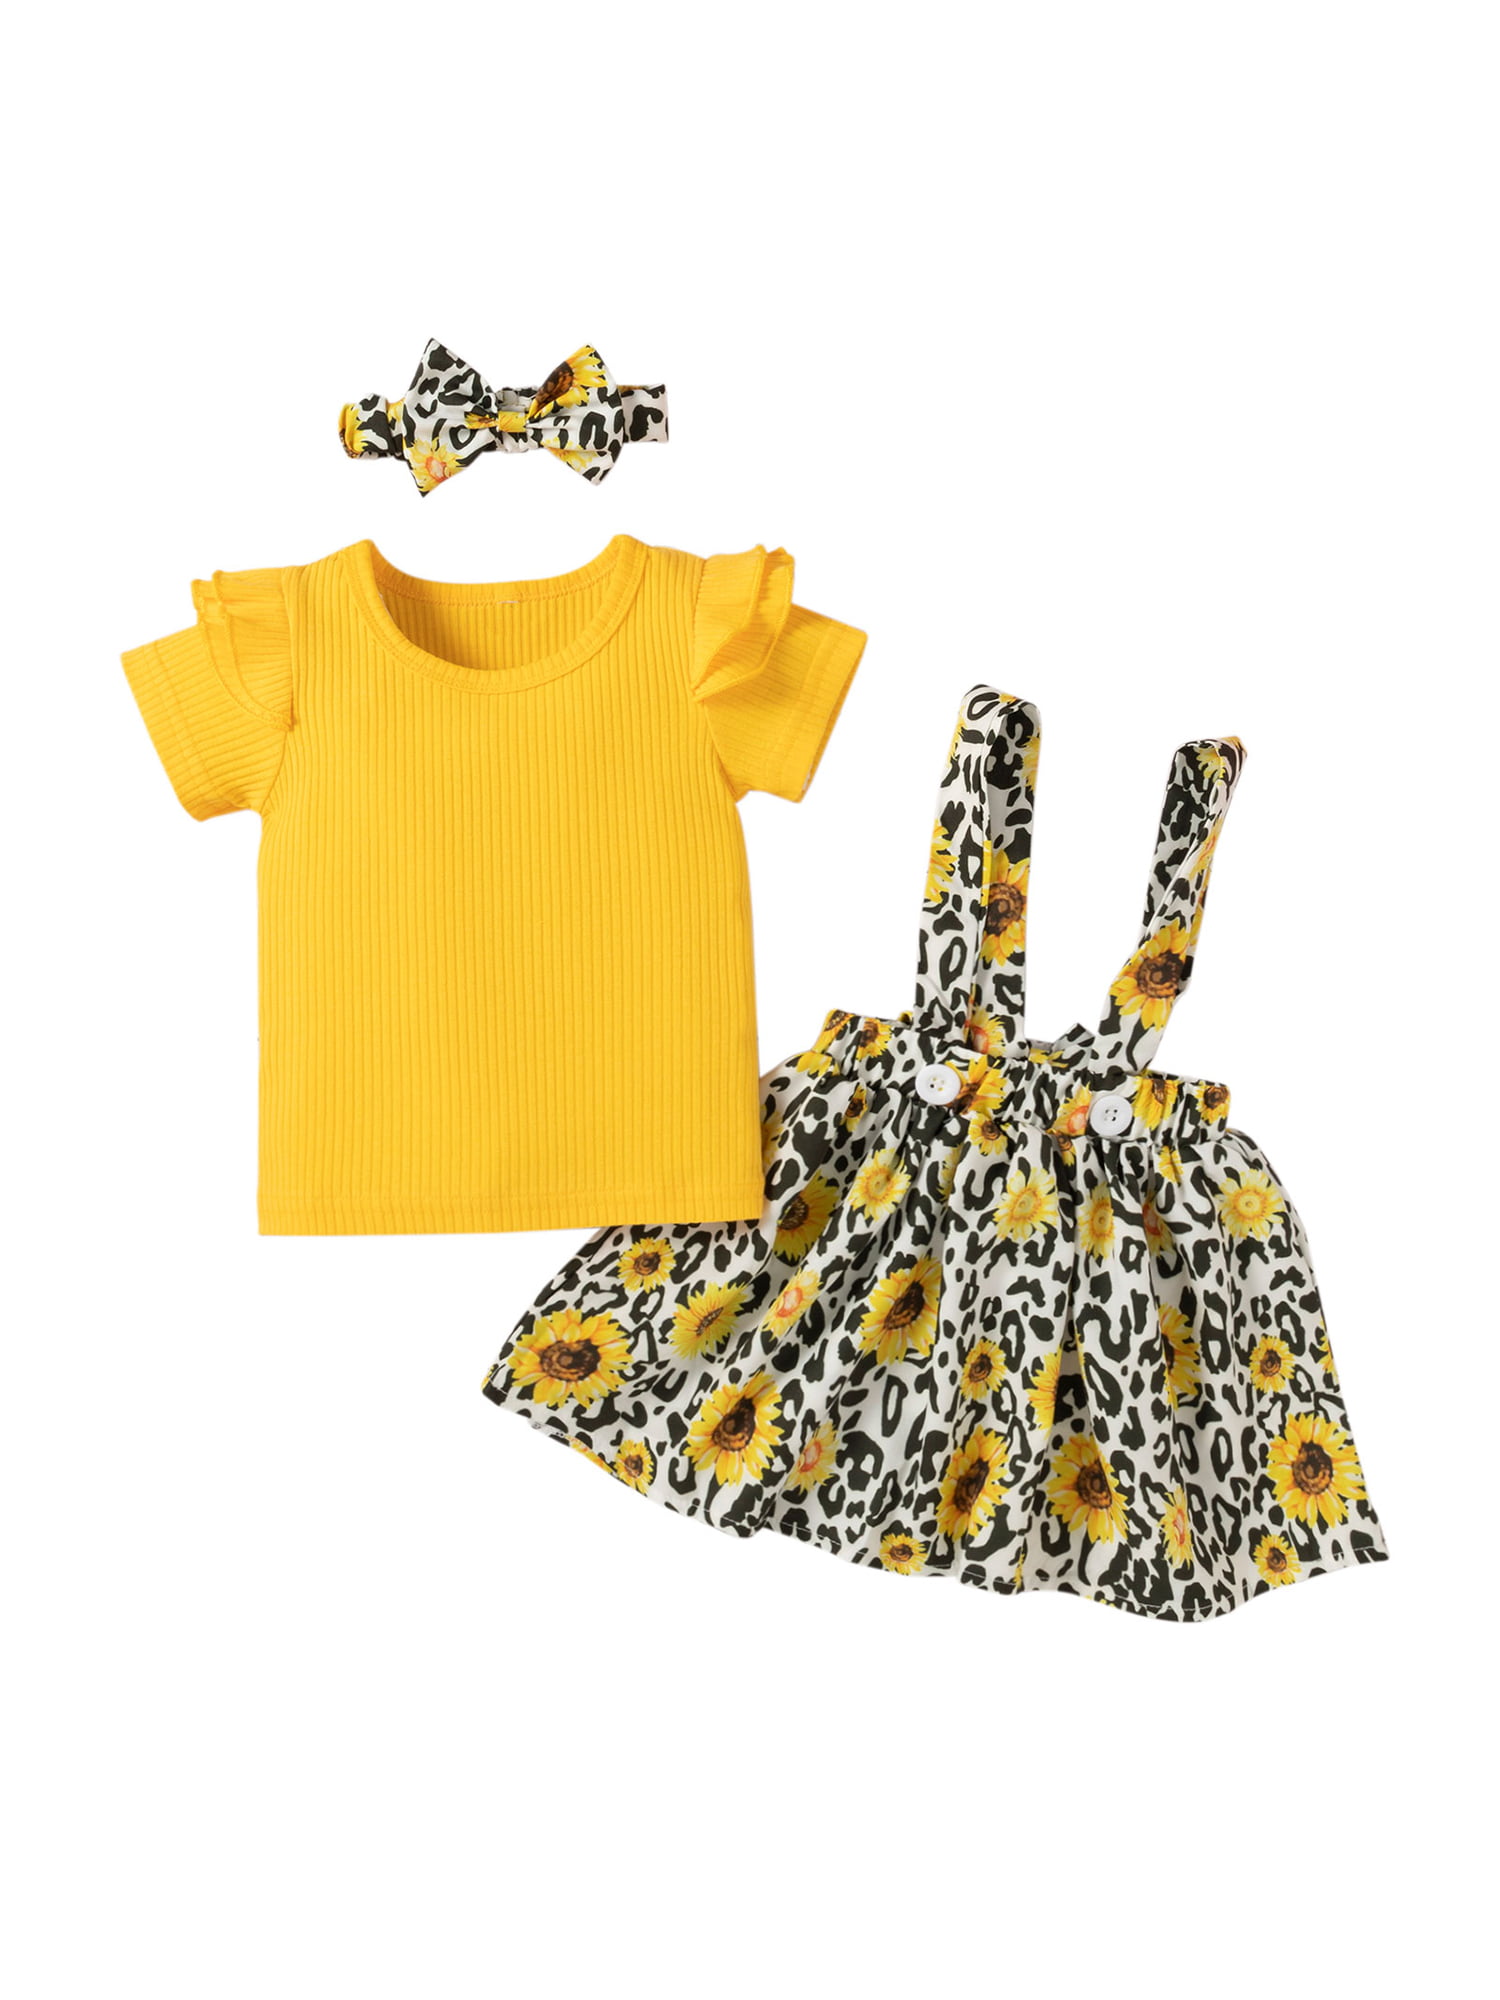 Canrulo 3pcs Infant Baby Girls Clothes Fly Sleeve T Shirts+Sunflowers  Leopard Printed Suspender Skirt + Headband Set Yellow 6-12 Months 